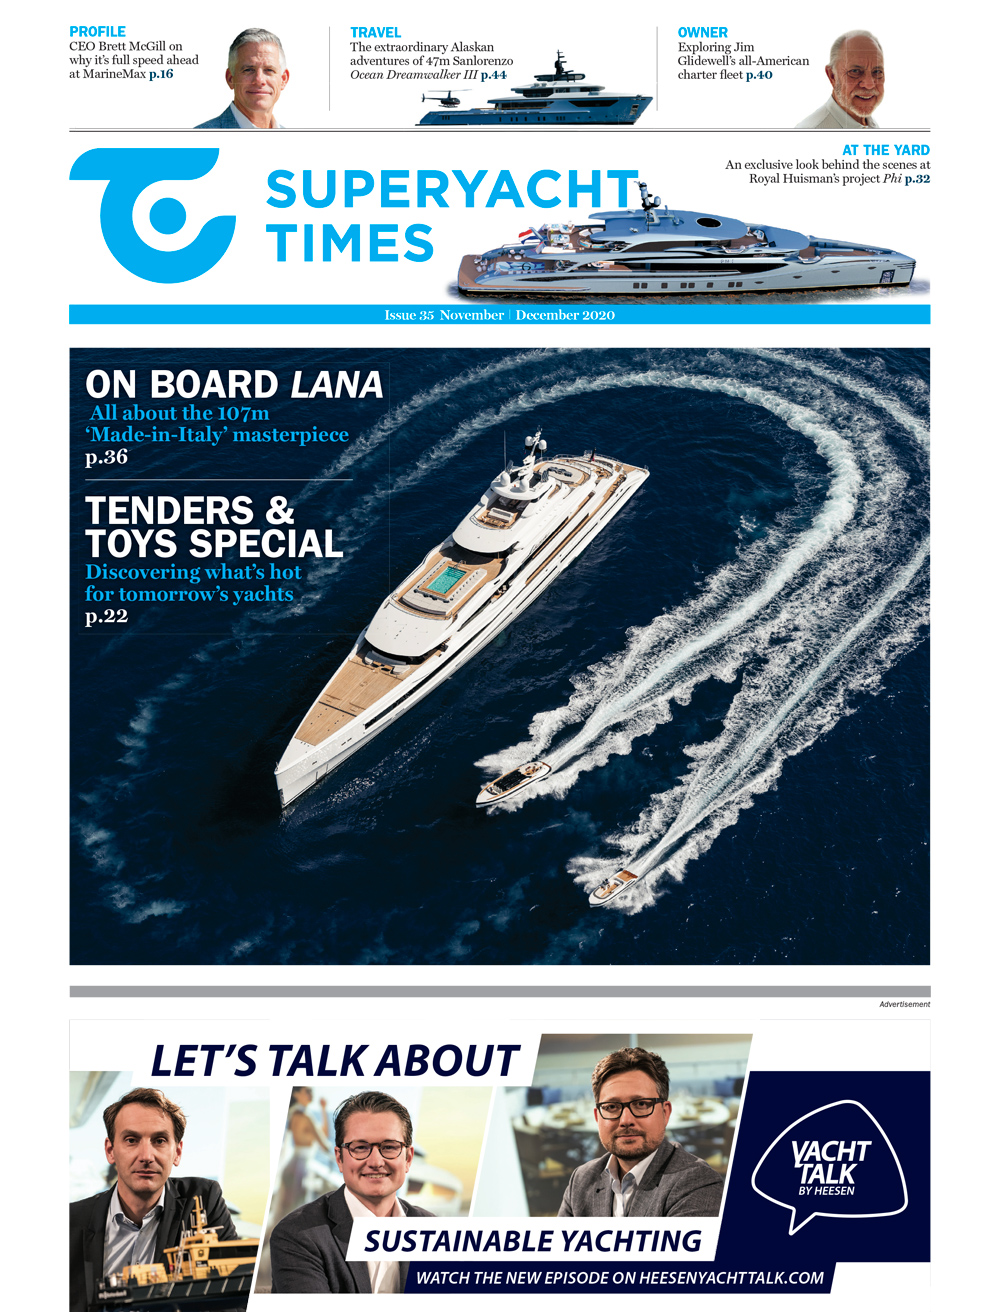 superyacht times advertising